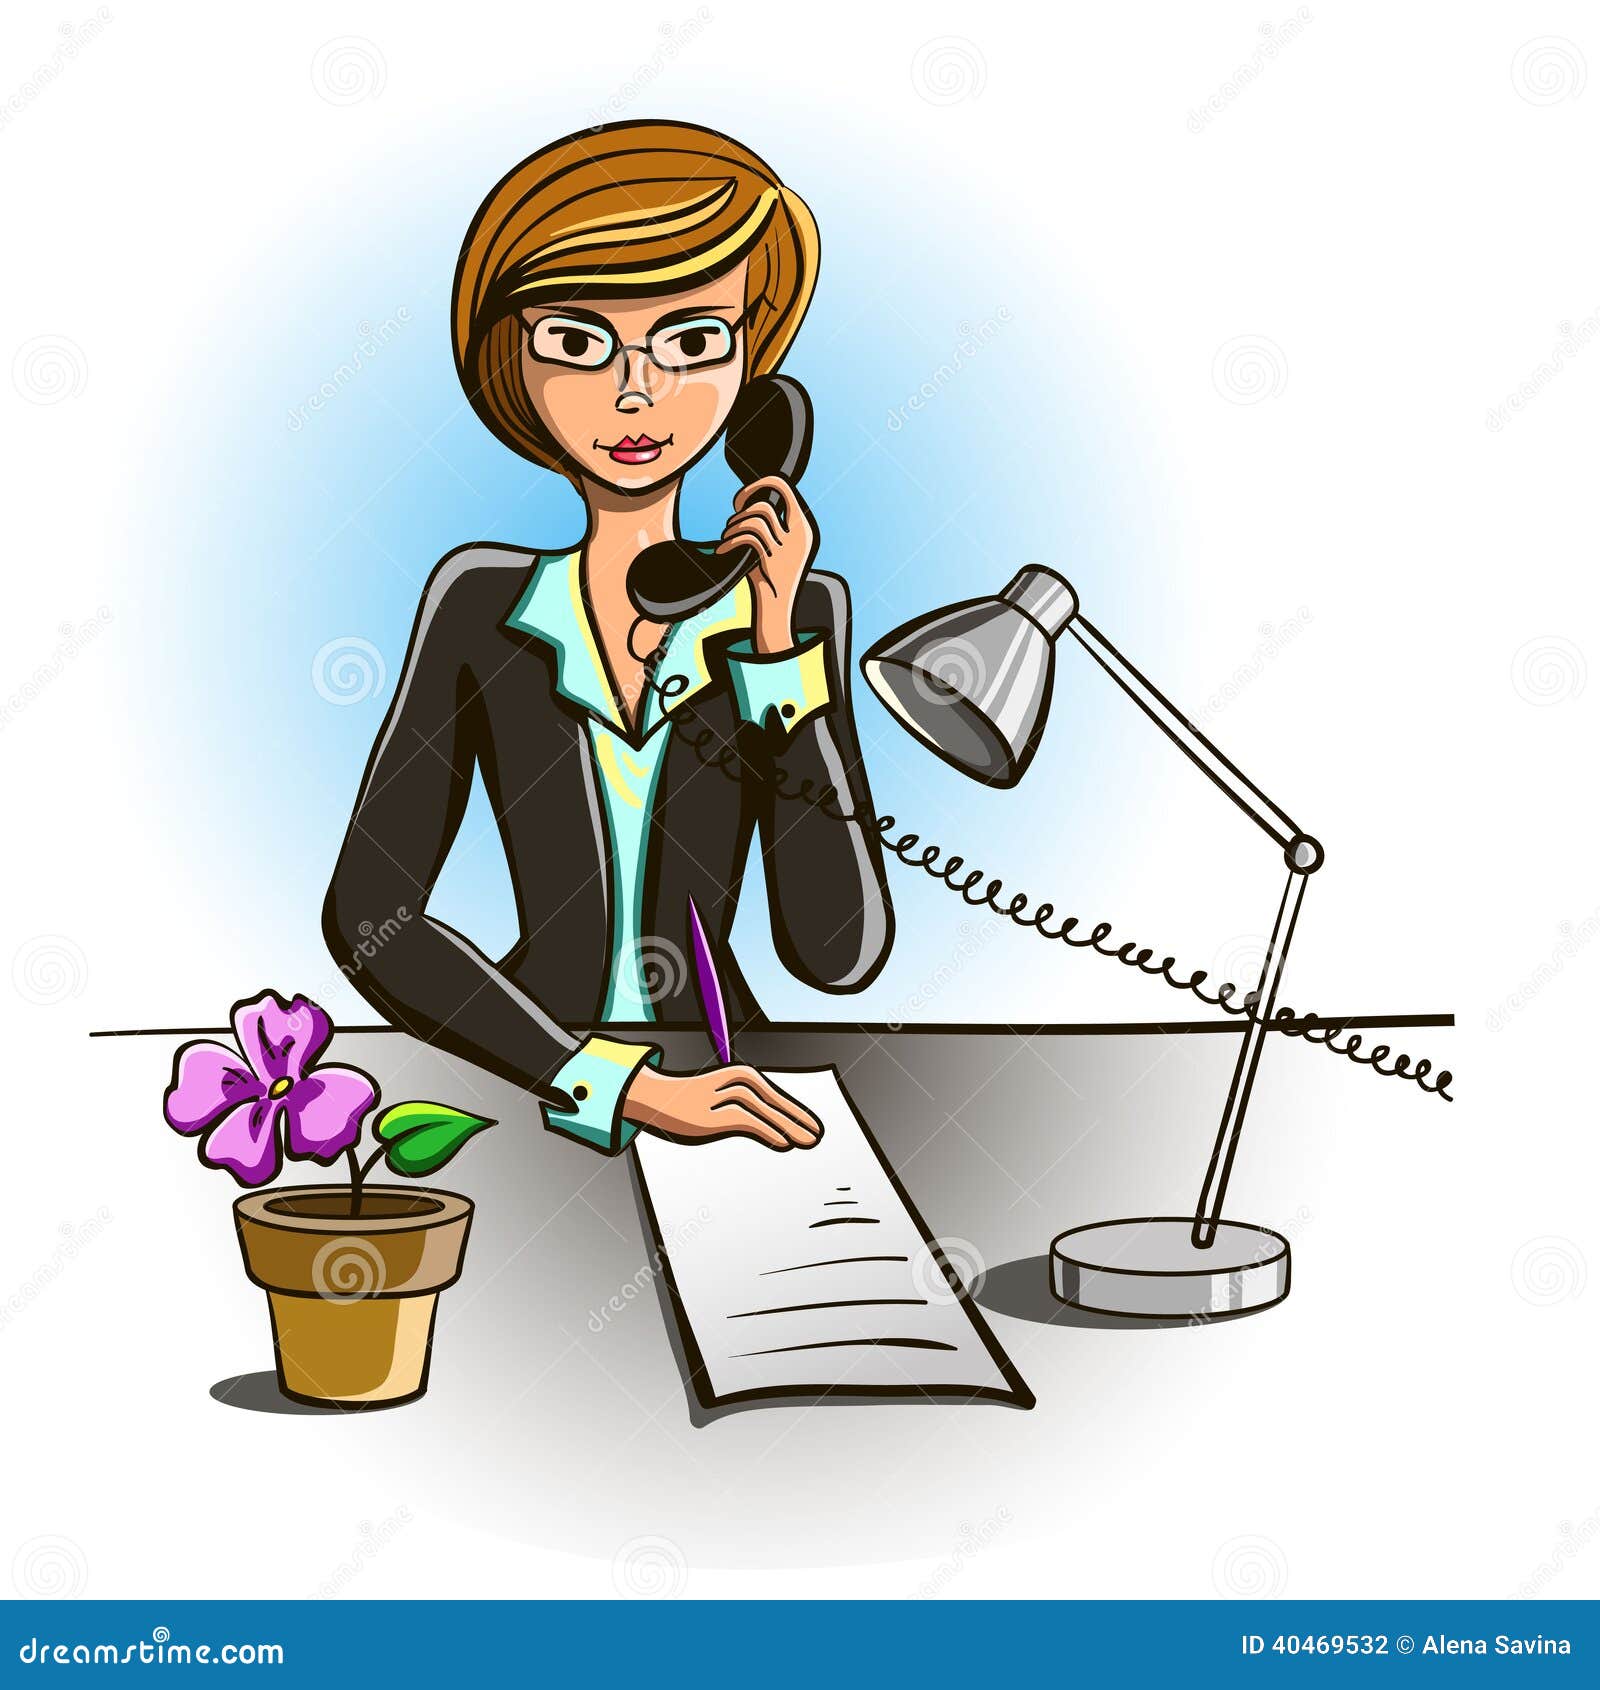 office reception clipart - photo #42